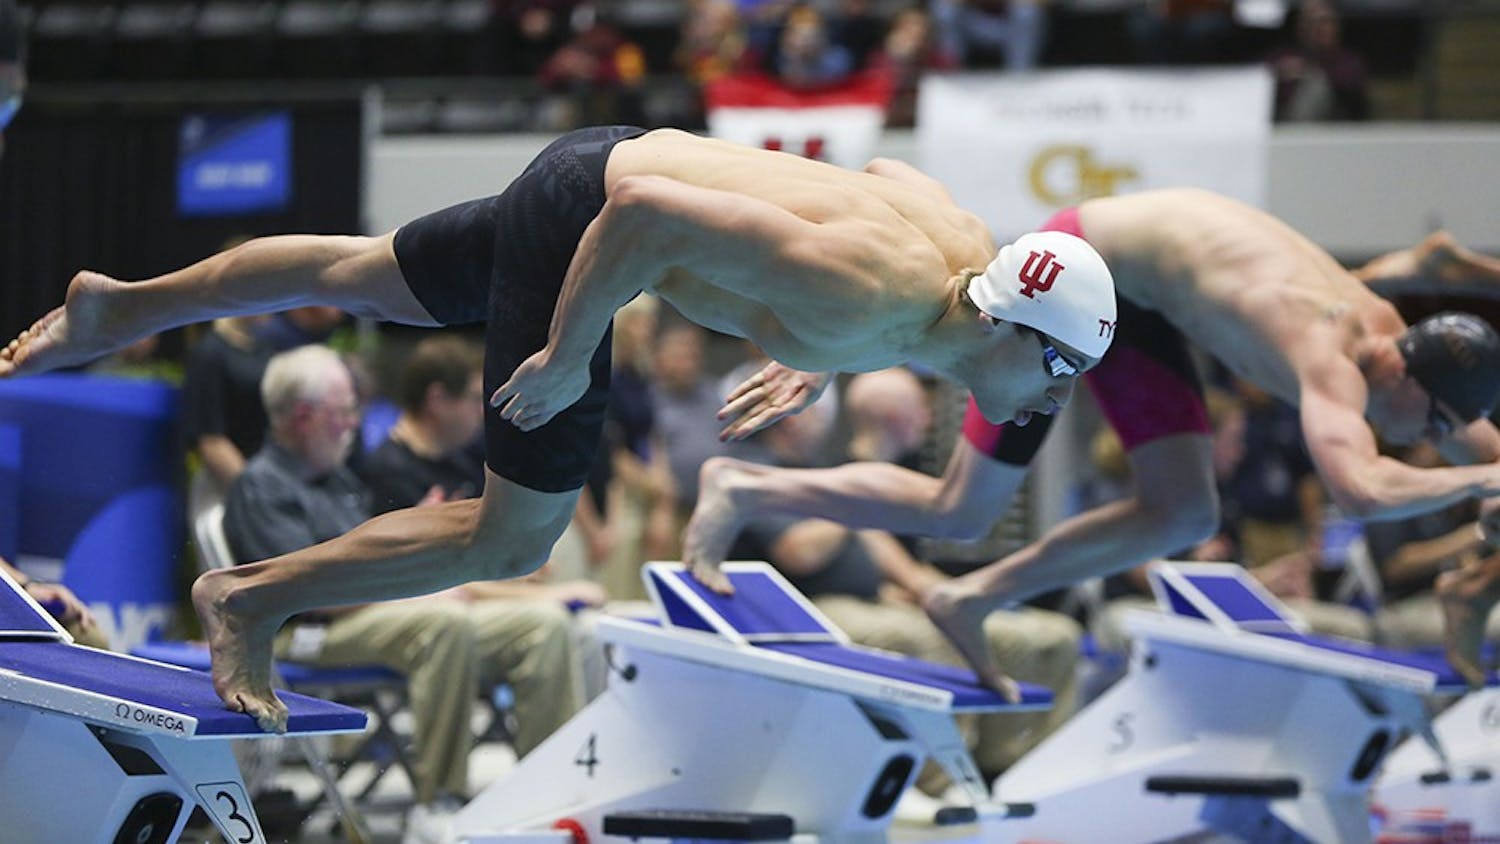 Former Hoosier Blake Pieroni competes in the 200 yard freestyle during the 2017 NCAA Swimming and Diving Championships. Pieroni and two other Hoosiers are nominated for the 2018 Golden Goggles Awards.&nbsp;